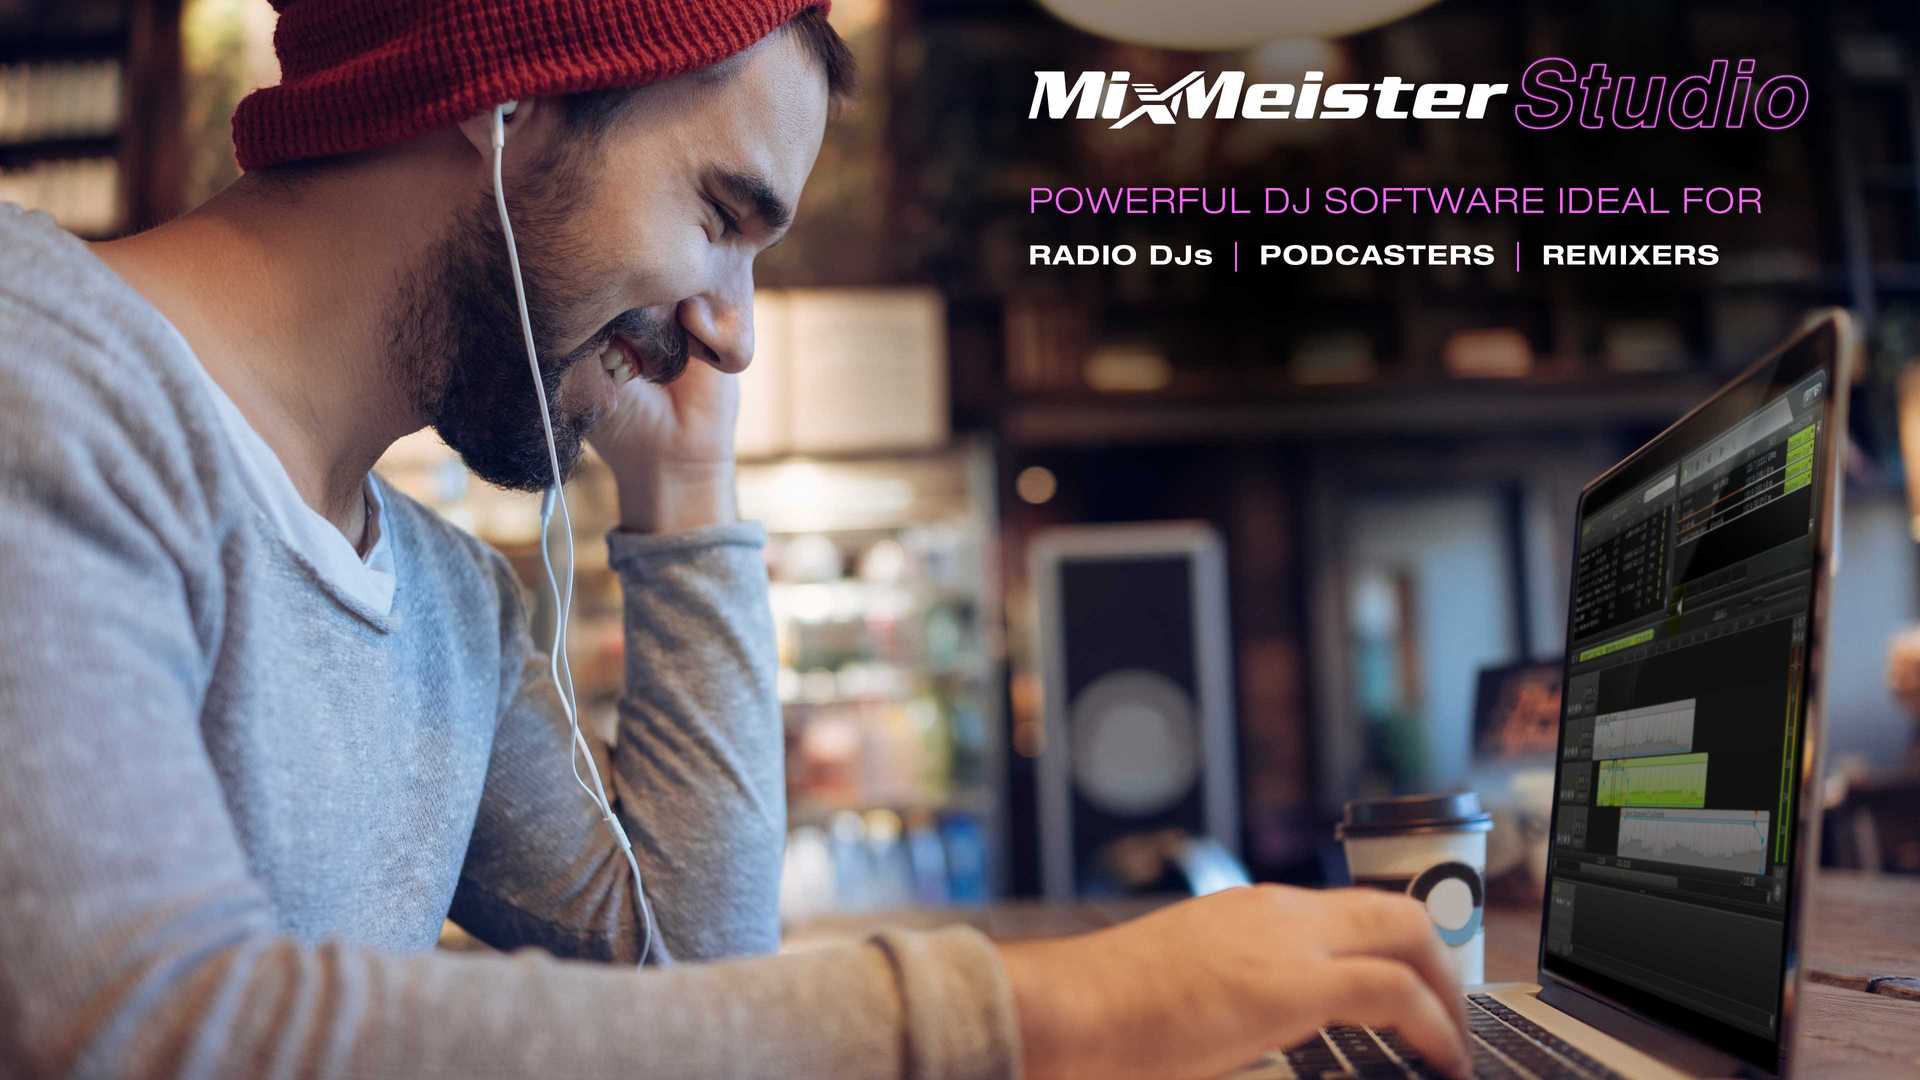 MixMeister Studio, Powerful DJ Software Ideal for Radio DJs, Podcasters, Remixers